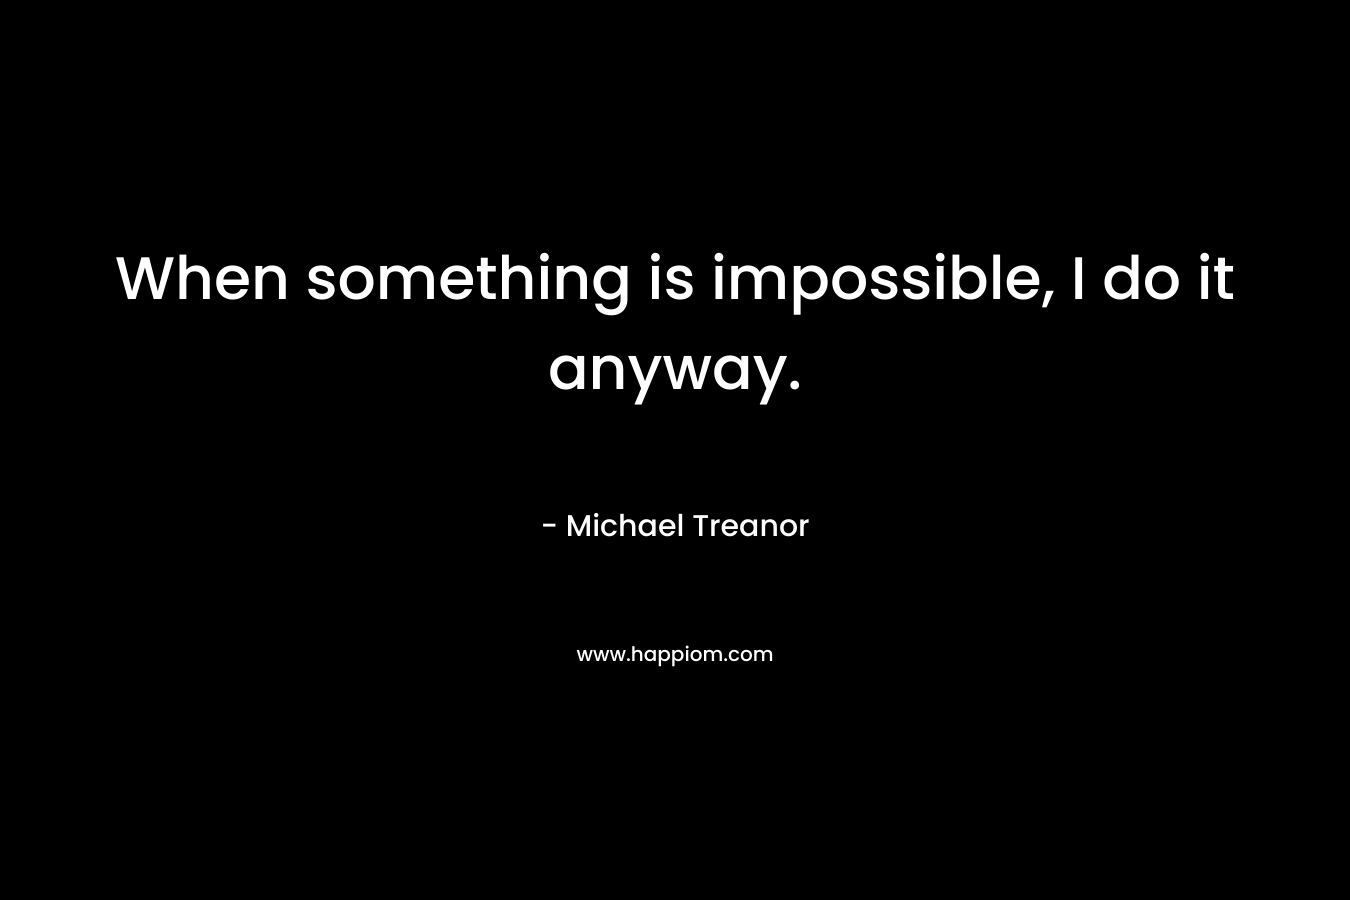 When something is impossible, I do it anyway. – Michael Treanor